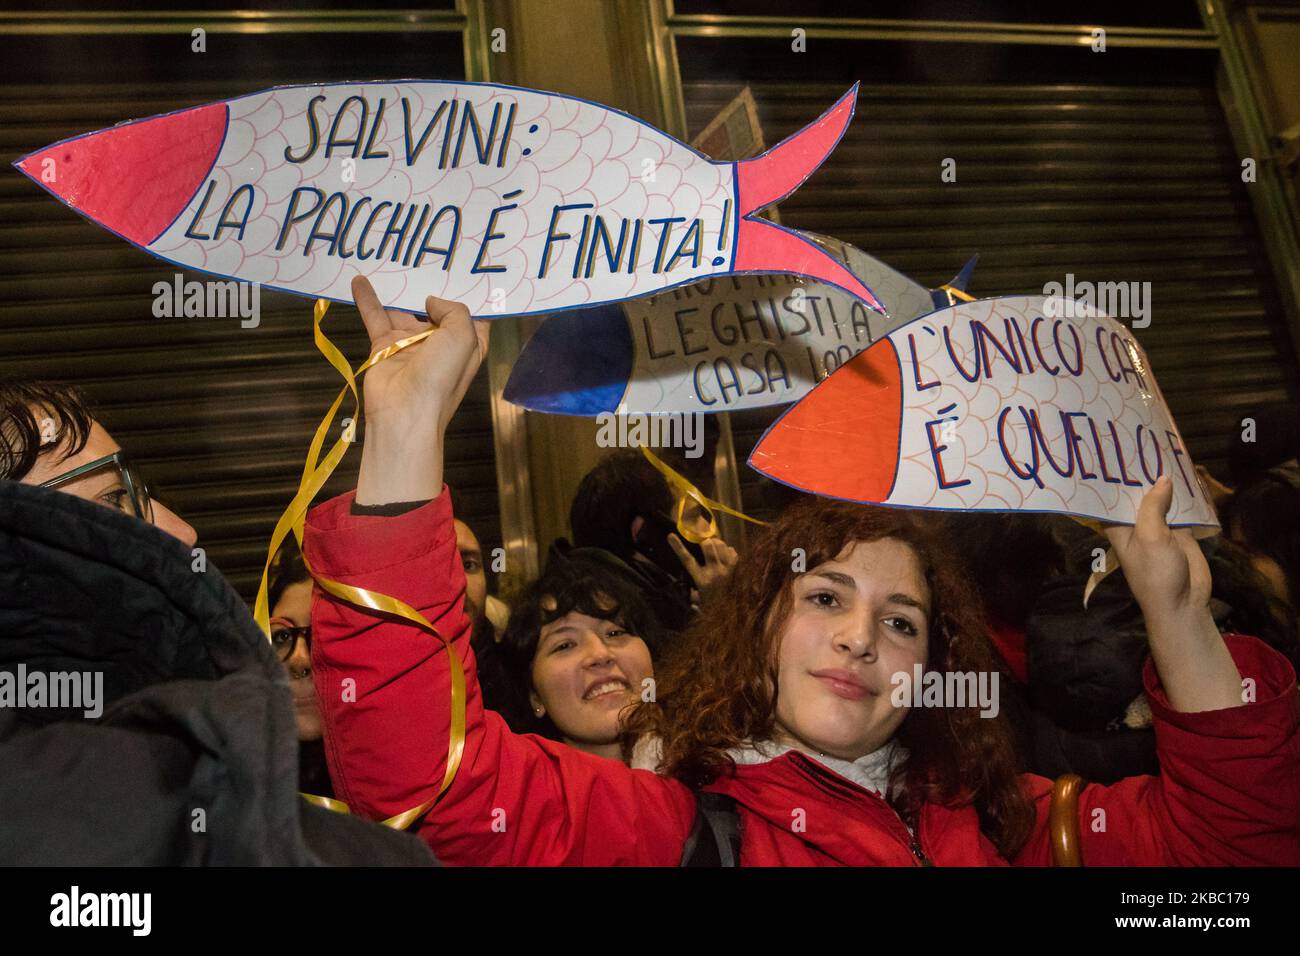 Milan, Italy, Sunday, December 01, 2019. Thousands of people gathered in Piazza Duomo in Milan for the ‘Sardine’ movement, to demonstrate against Salvini the leader of the 'Lega nord' to reassert values of tolerance and moderation. The people create a collective singsong, involving the old Resistance favourite, Bella Ciao. (Photo by Mauro Ujetto/NurPhoto) Stock Photo